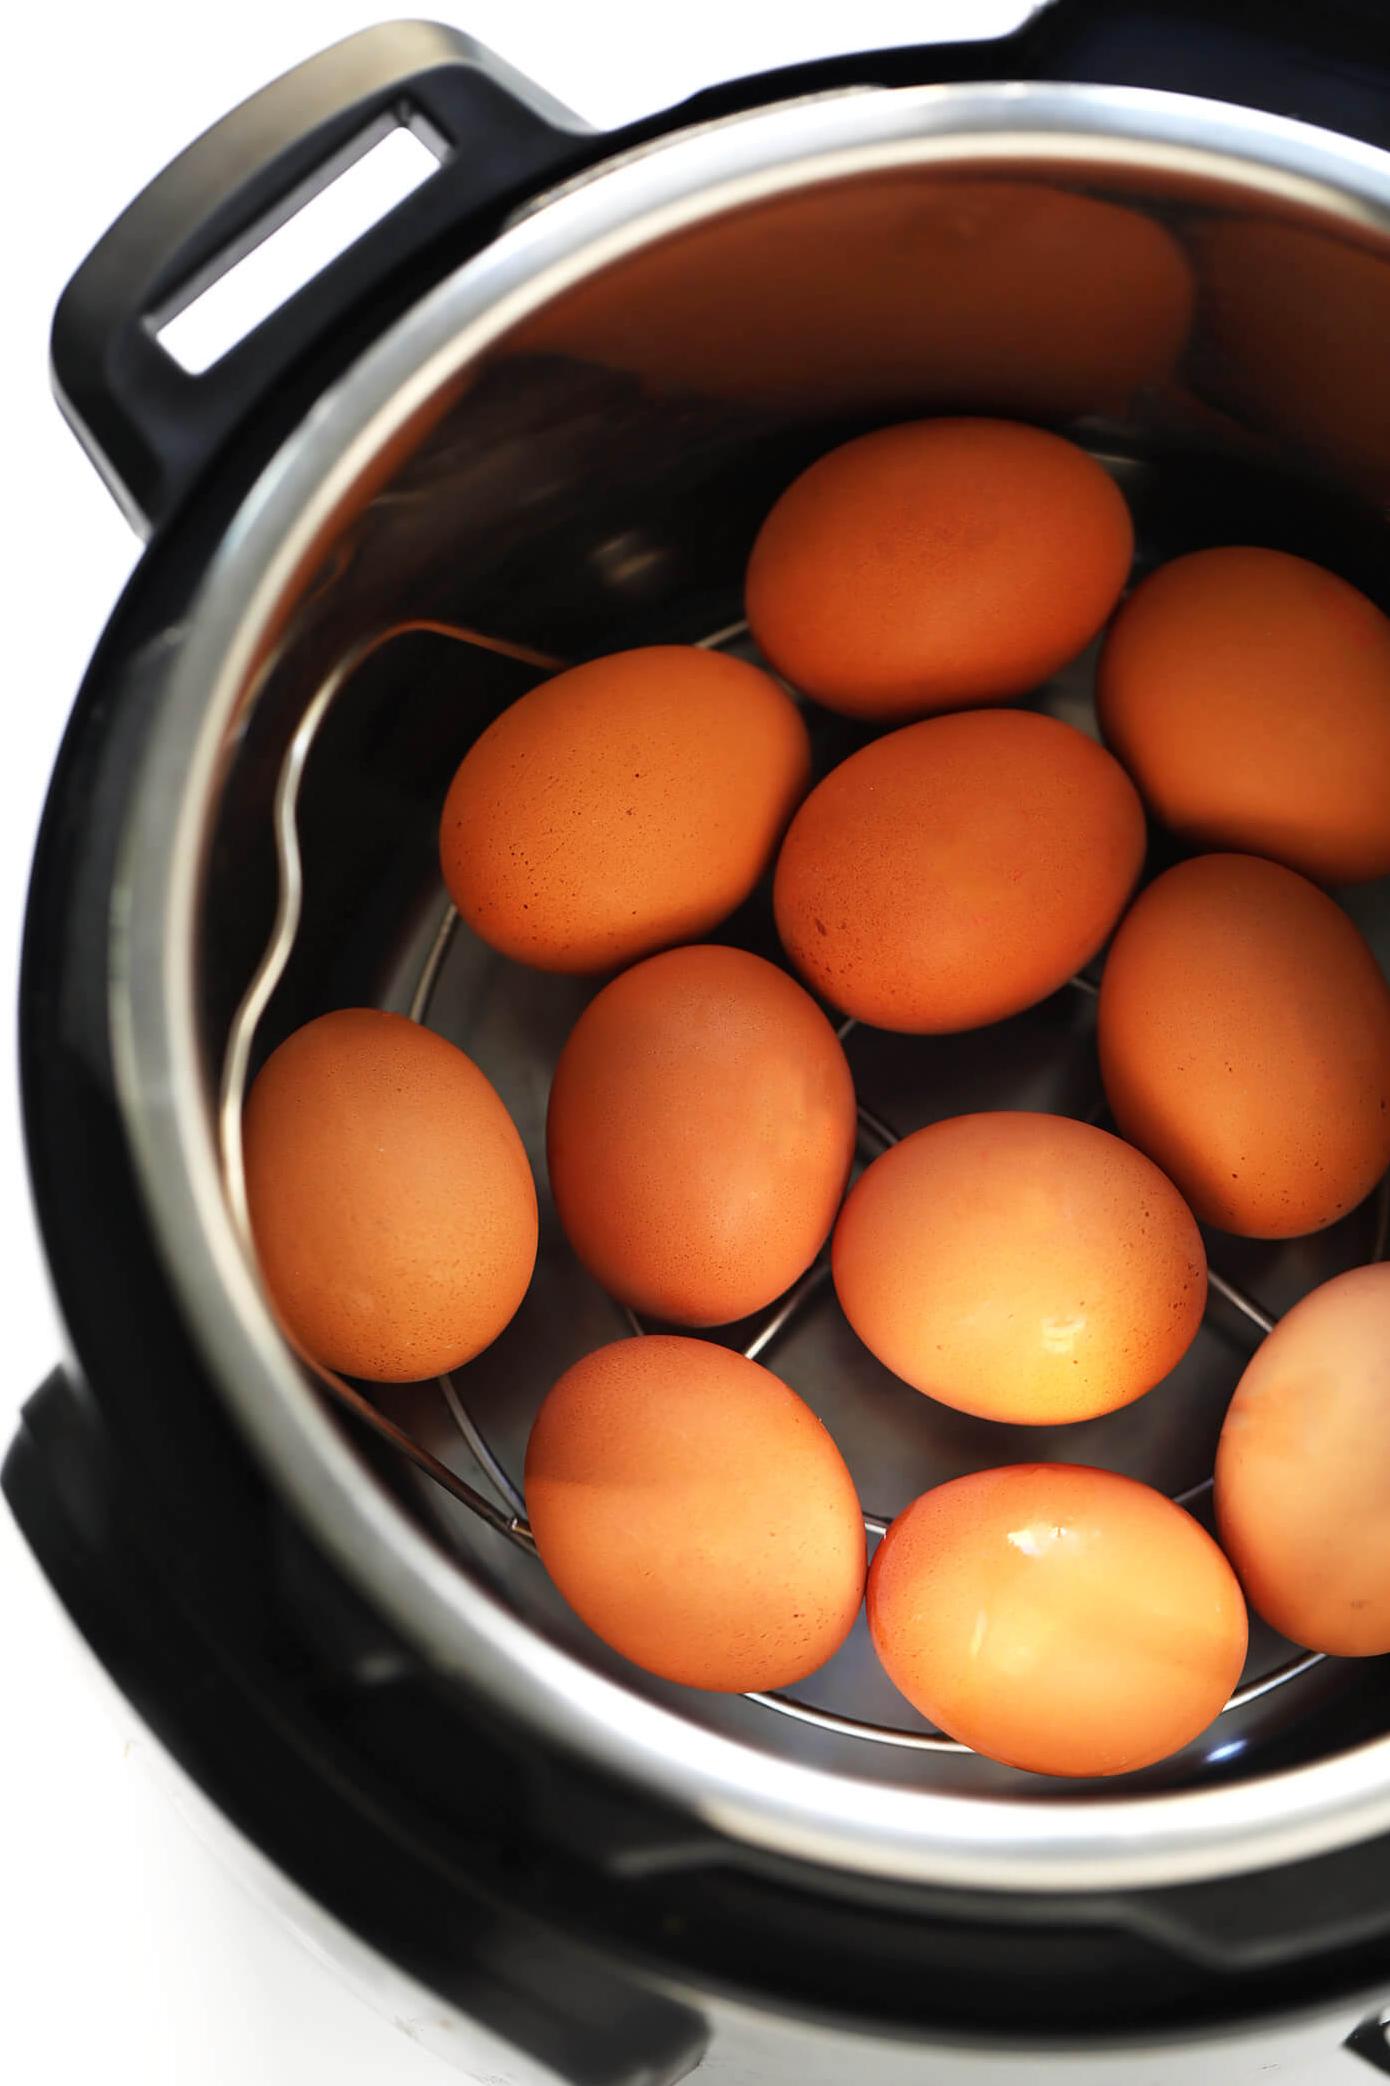  These eggs come out perfectly cooked and ready to eat in just minutes.